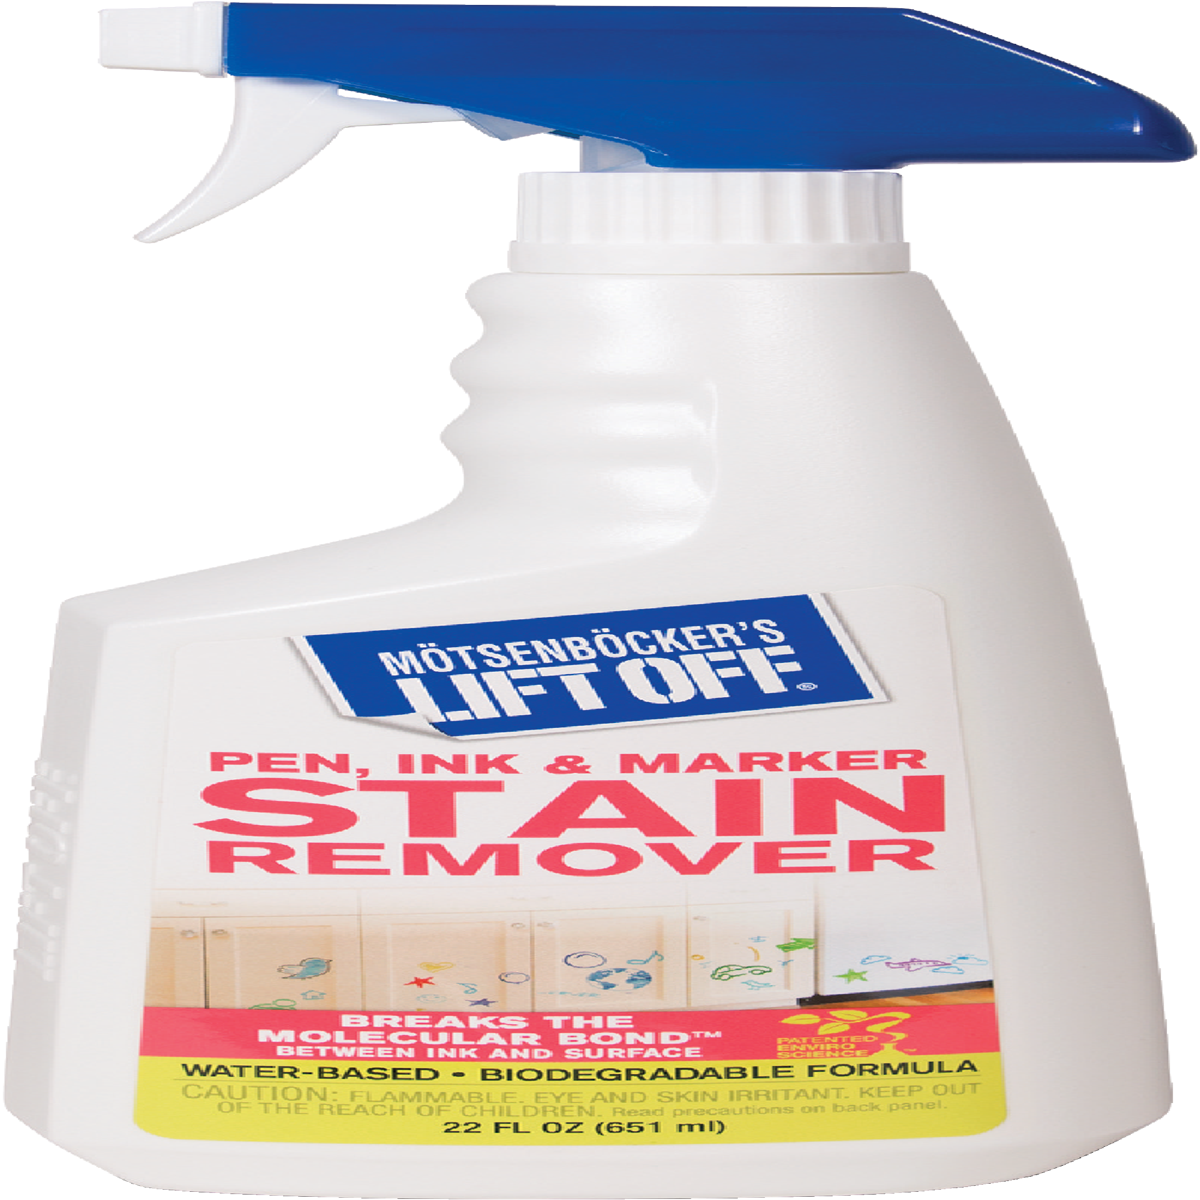 Carpet Stain Remover